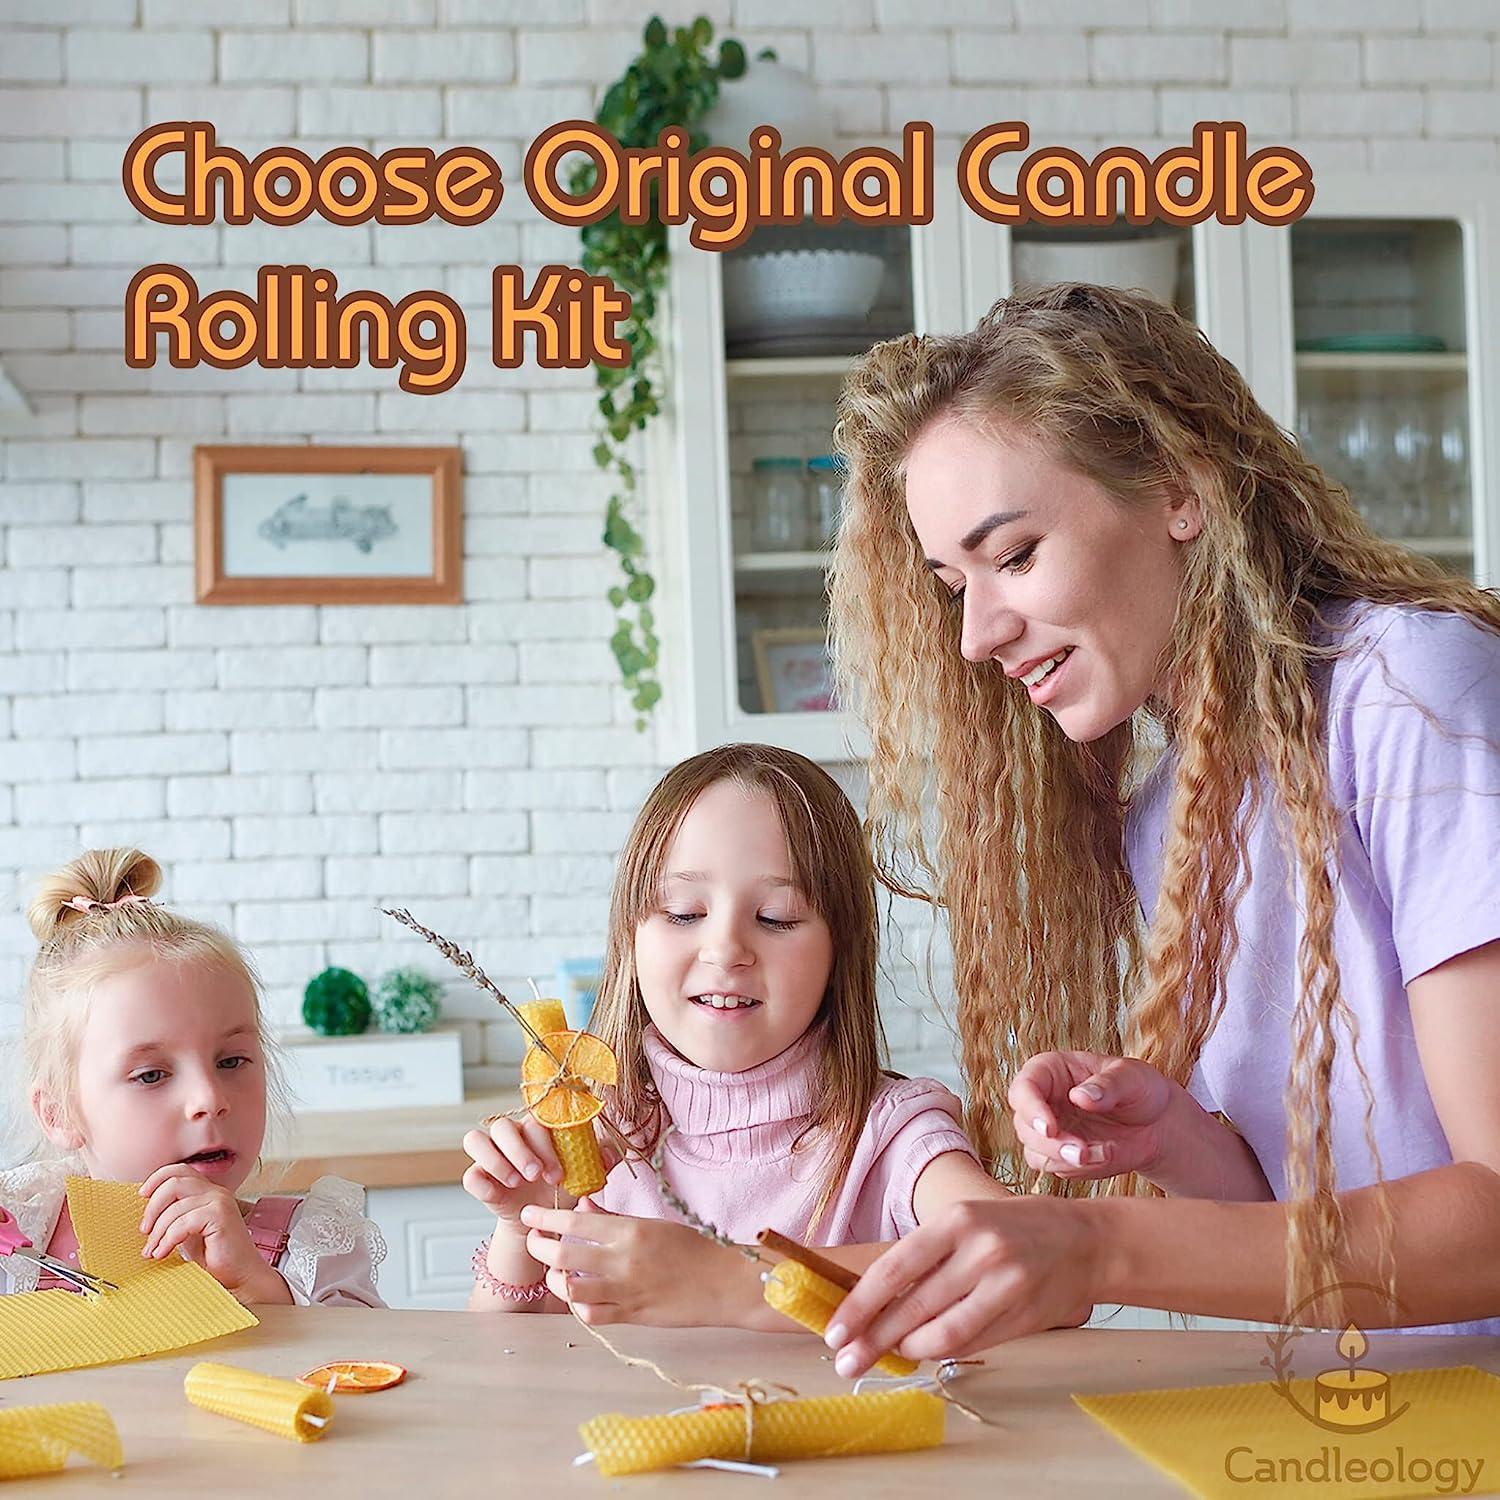 Beeswax Candle Making Kit - Natural DIY Candle Making Kit for Kids and  Adults, Candle Rolling Kit with Beeswax Sheets for Candle Making